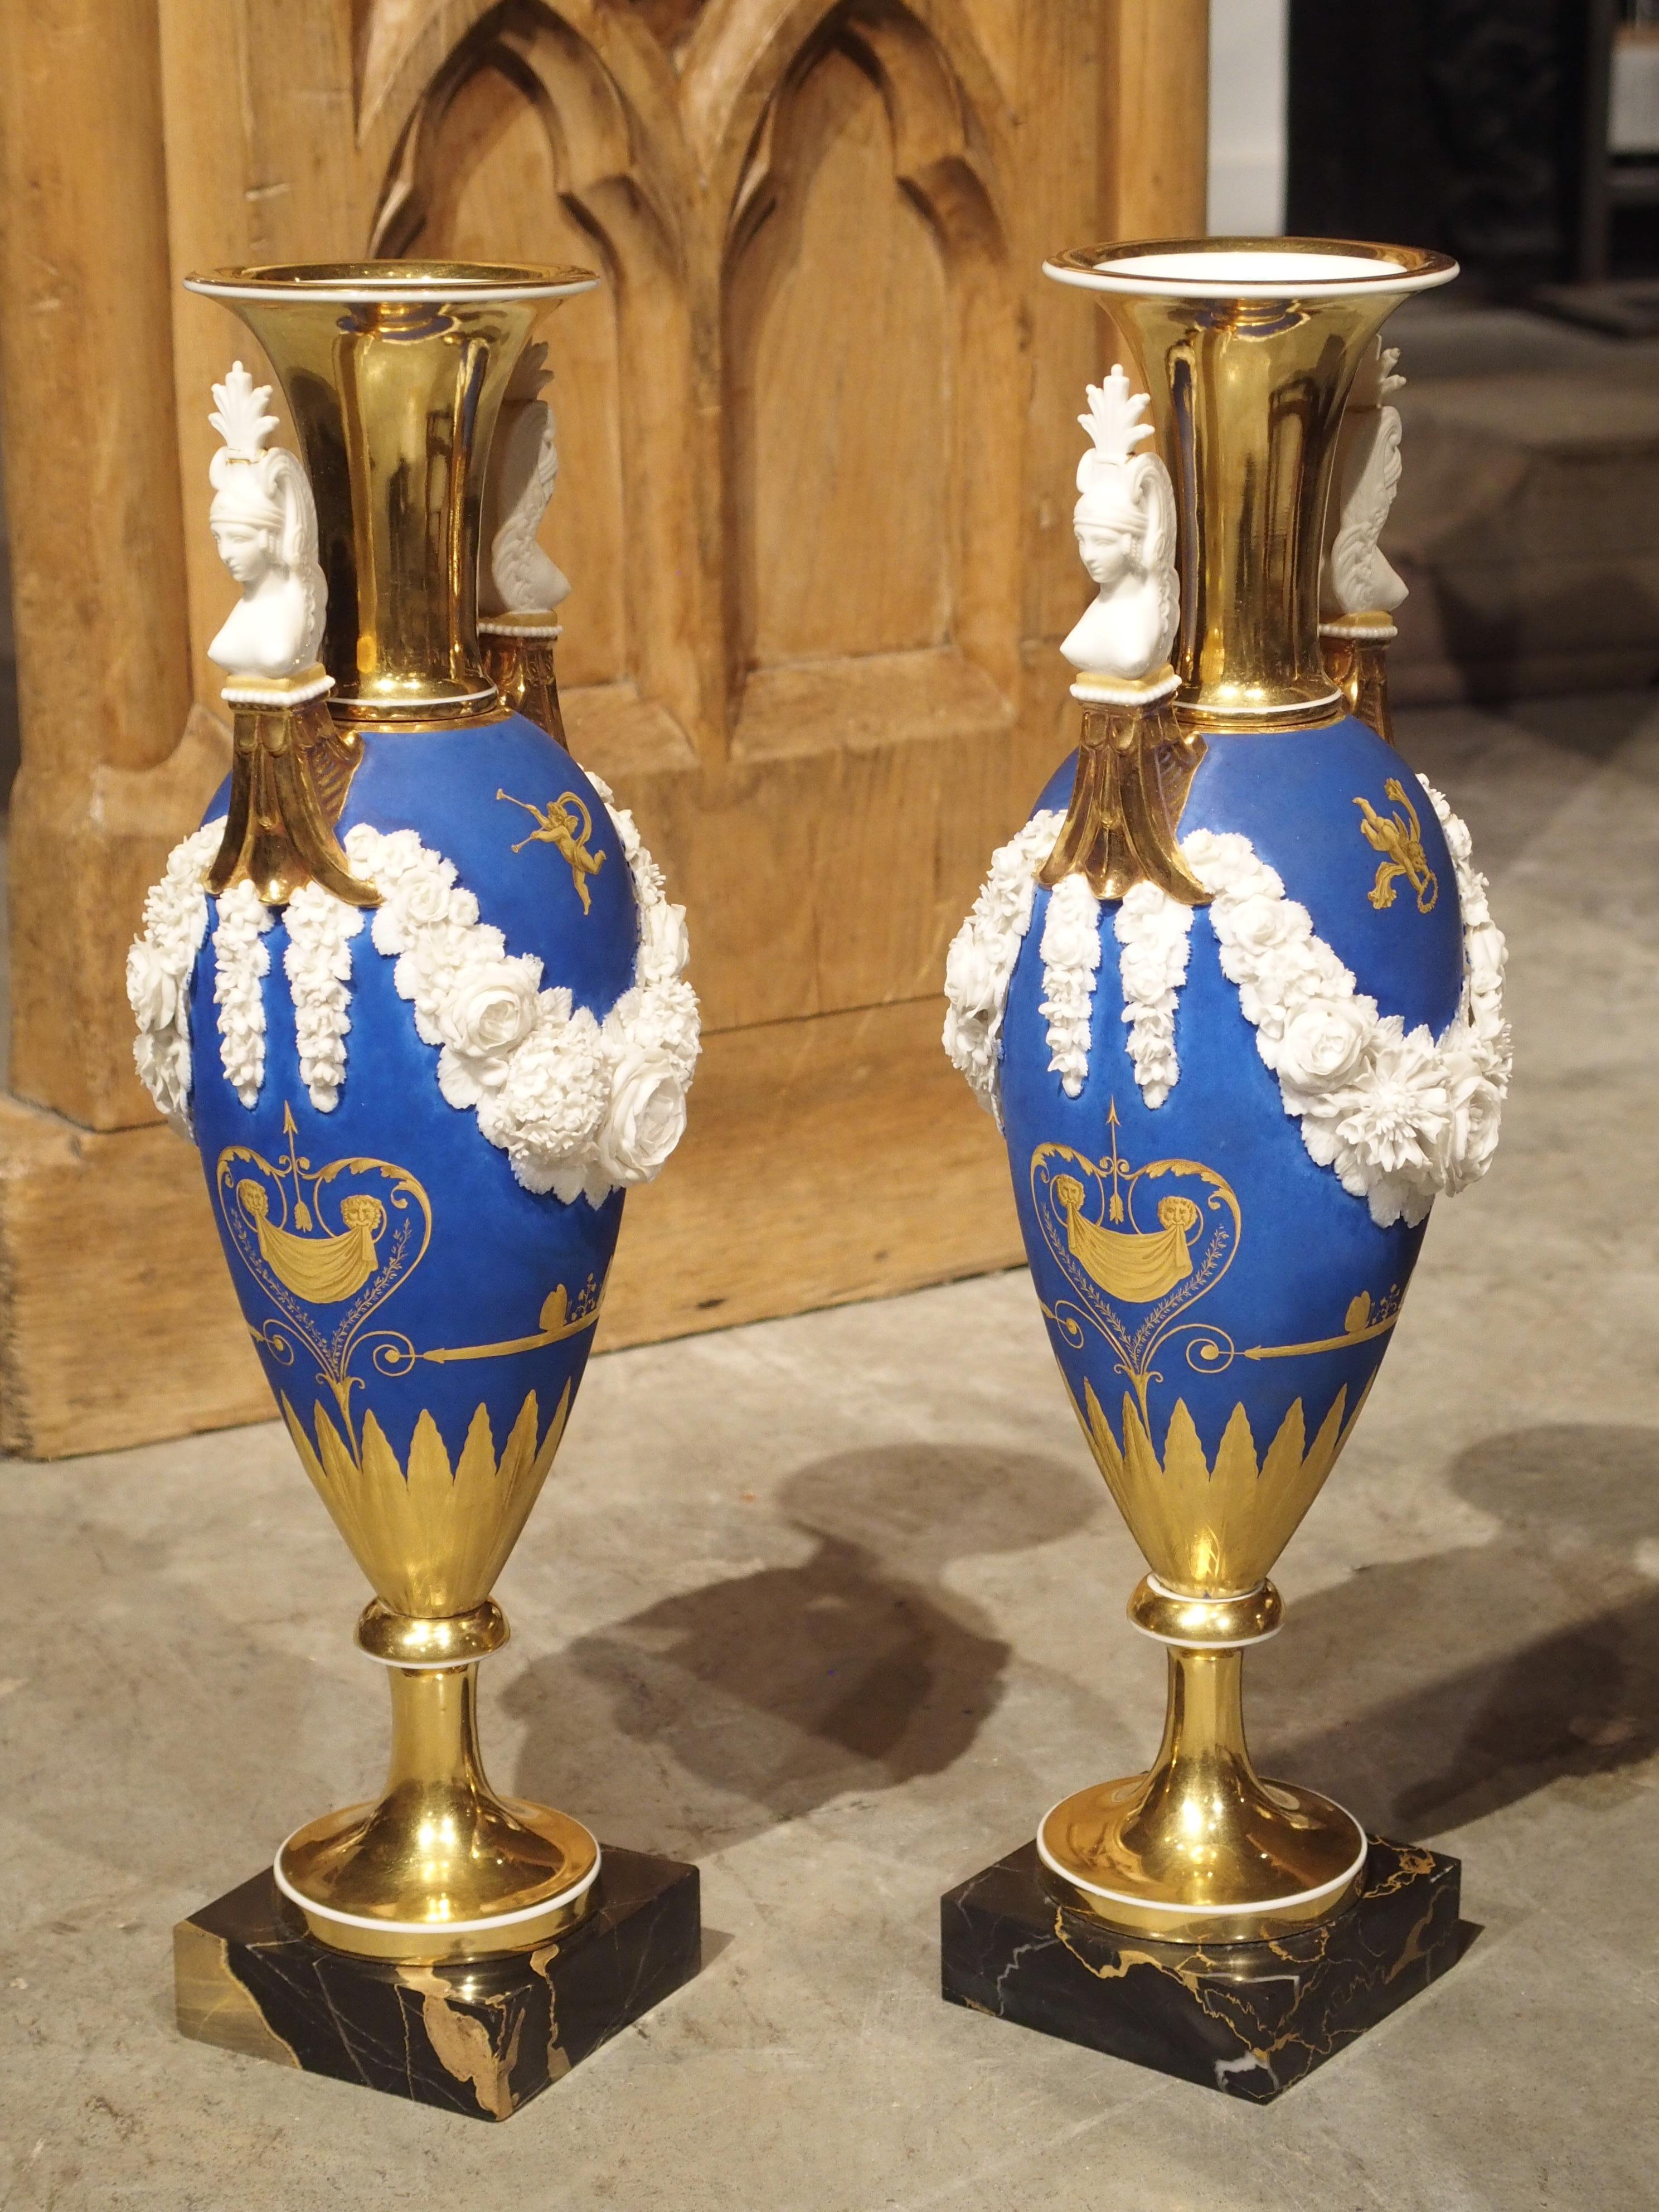 Pair of Neoclassical Paris Porcelain Vases in Royal French Blue, Early 1800s For Sale 5